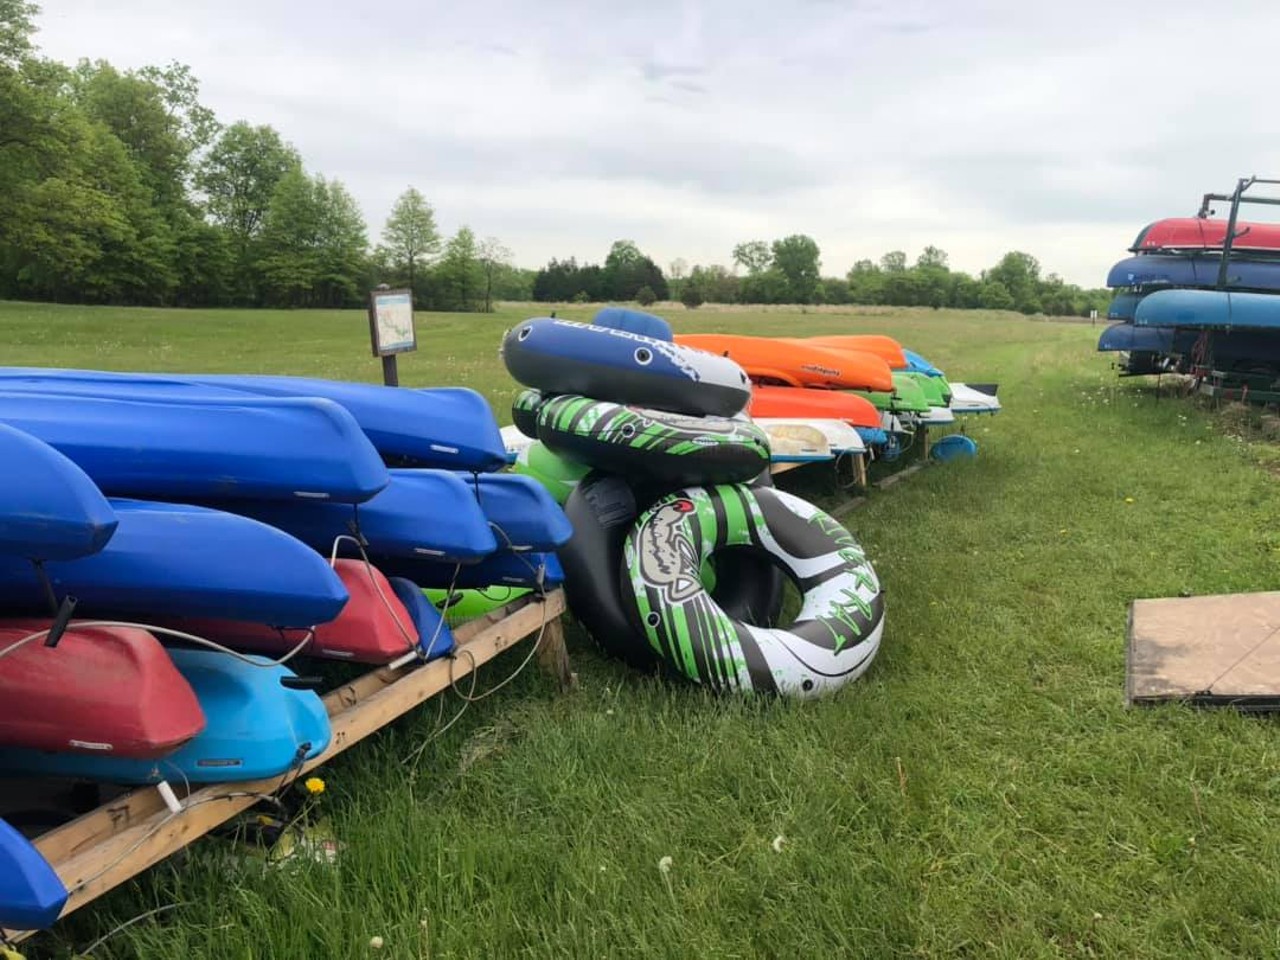 Motor City Canoe Rental26425 Atwater St. Flat Rock, (313) 473-9847 MotorCityCanoeRental.comMotor City Canoe Rental is a fun-for-all-ages rental shop that sits right on the Huron River, supplying everyone with all of their kayaking and canoeing needs. Motor City Canoe Rental also has available tubes and a pick-up service for people finishing at the end of the river.
Photo via  Moto City Canoe Rental / Facebook